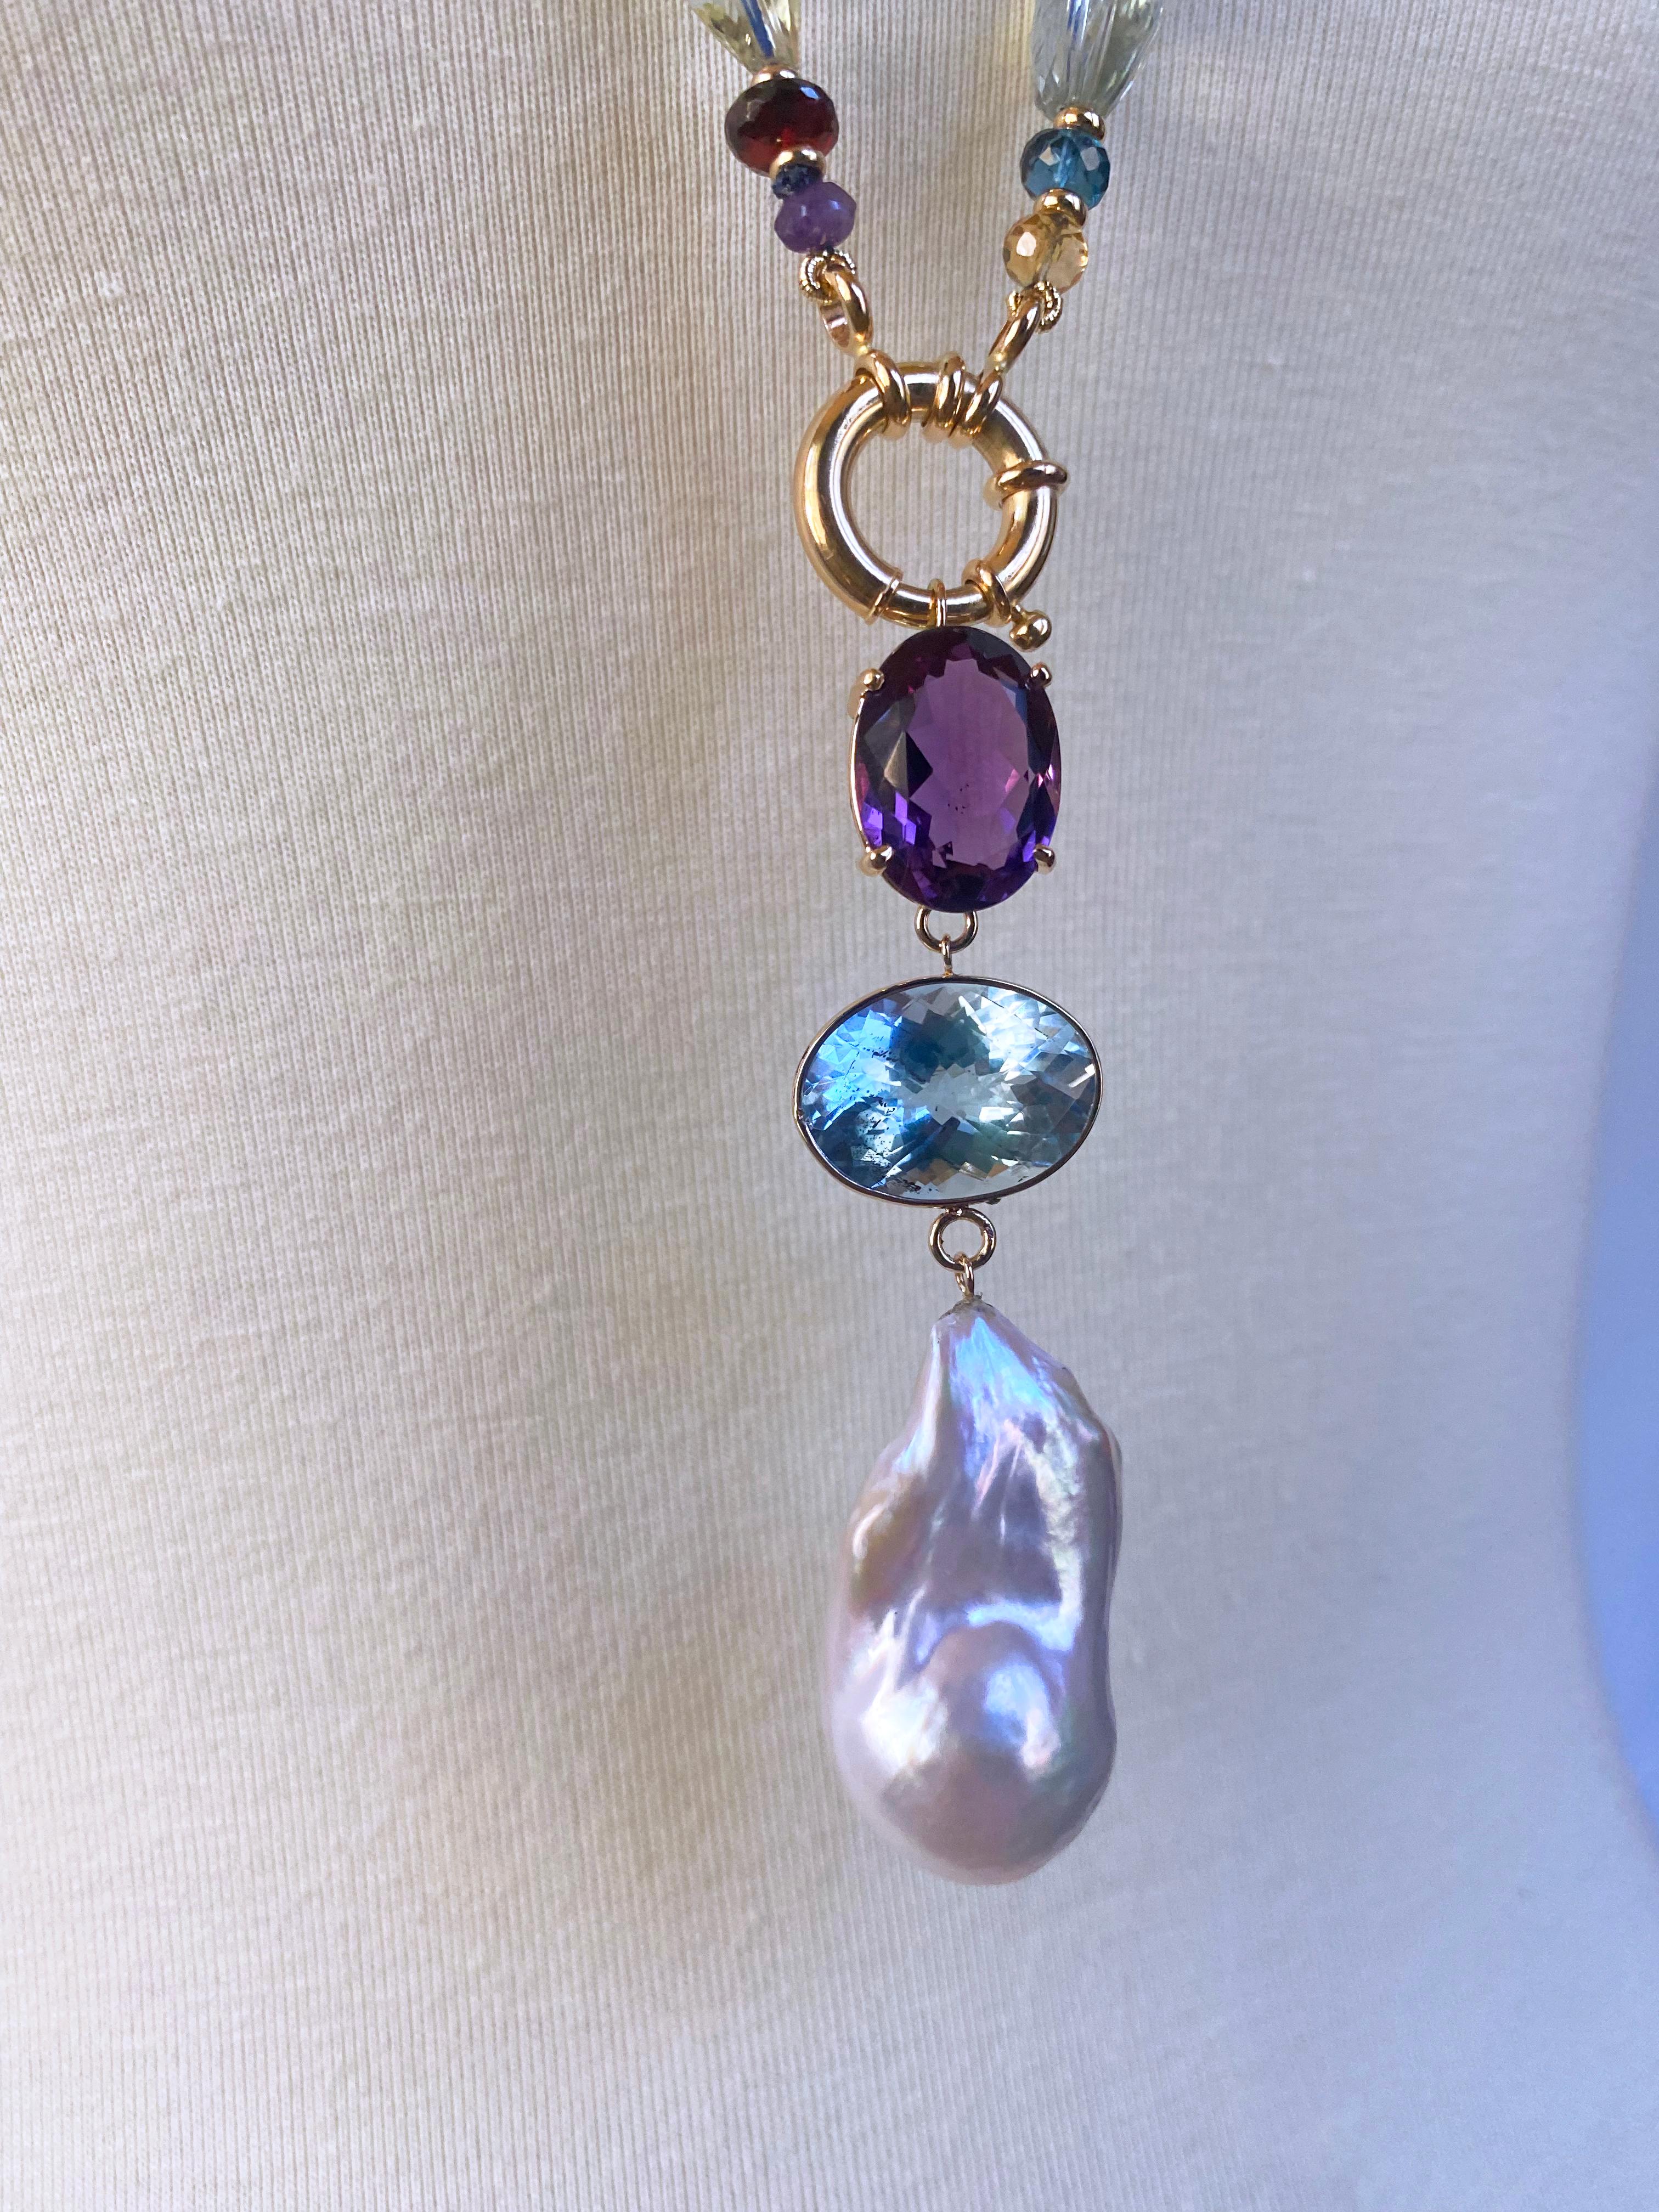 Stunning piece handmade by Marina J. This Necklace features faceted multi colored and multi shaped Semi Precious Gems all strung together into a beautiful One of A Kind piece. Brilliant Aquamarine, London Blue Topaz, Amethyst, Citrine, Kyanite,